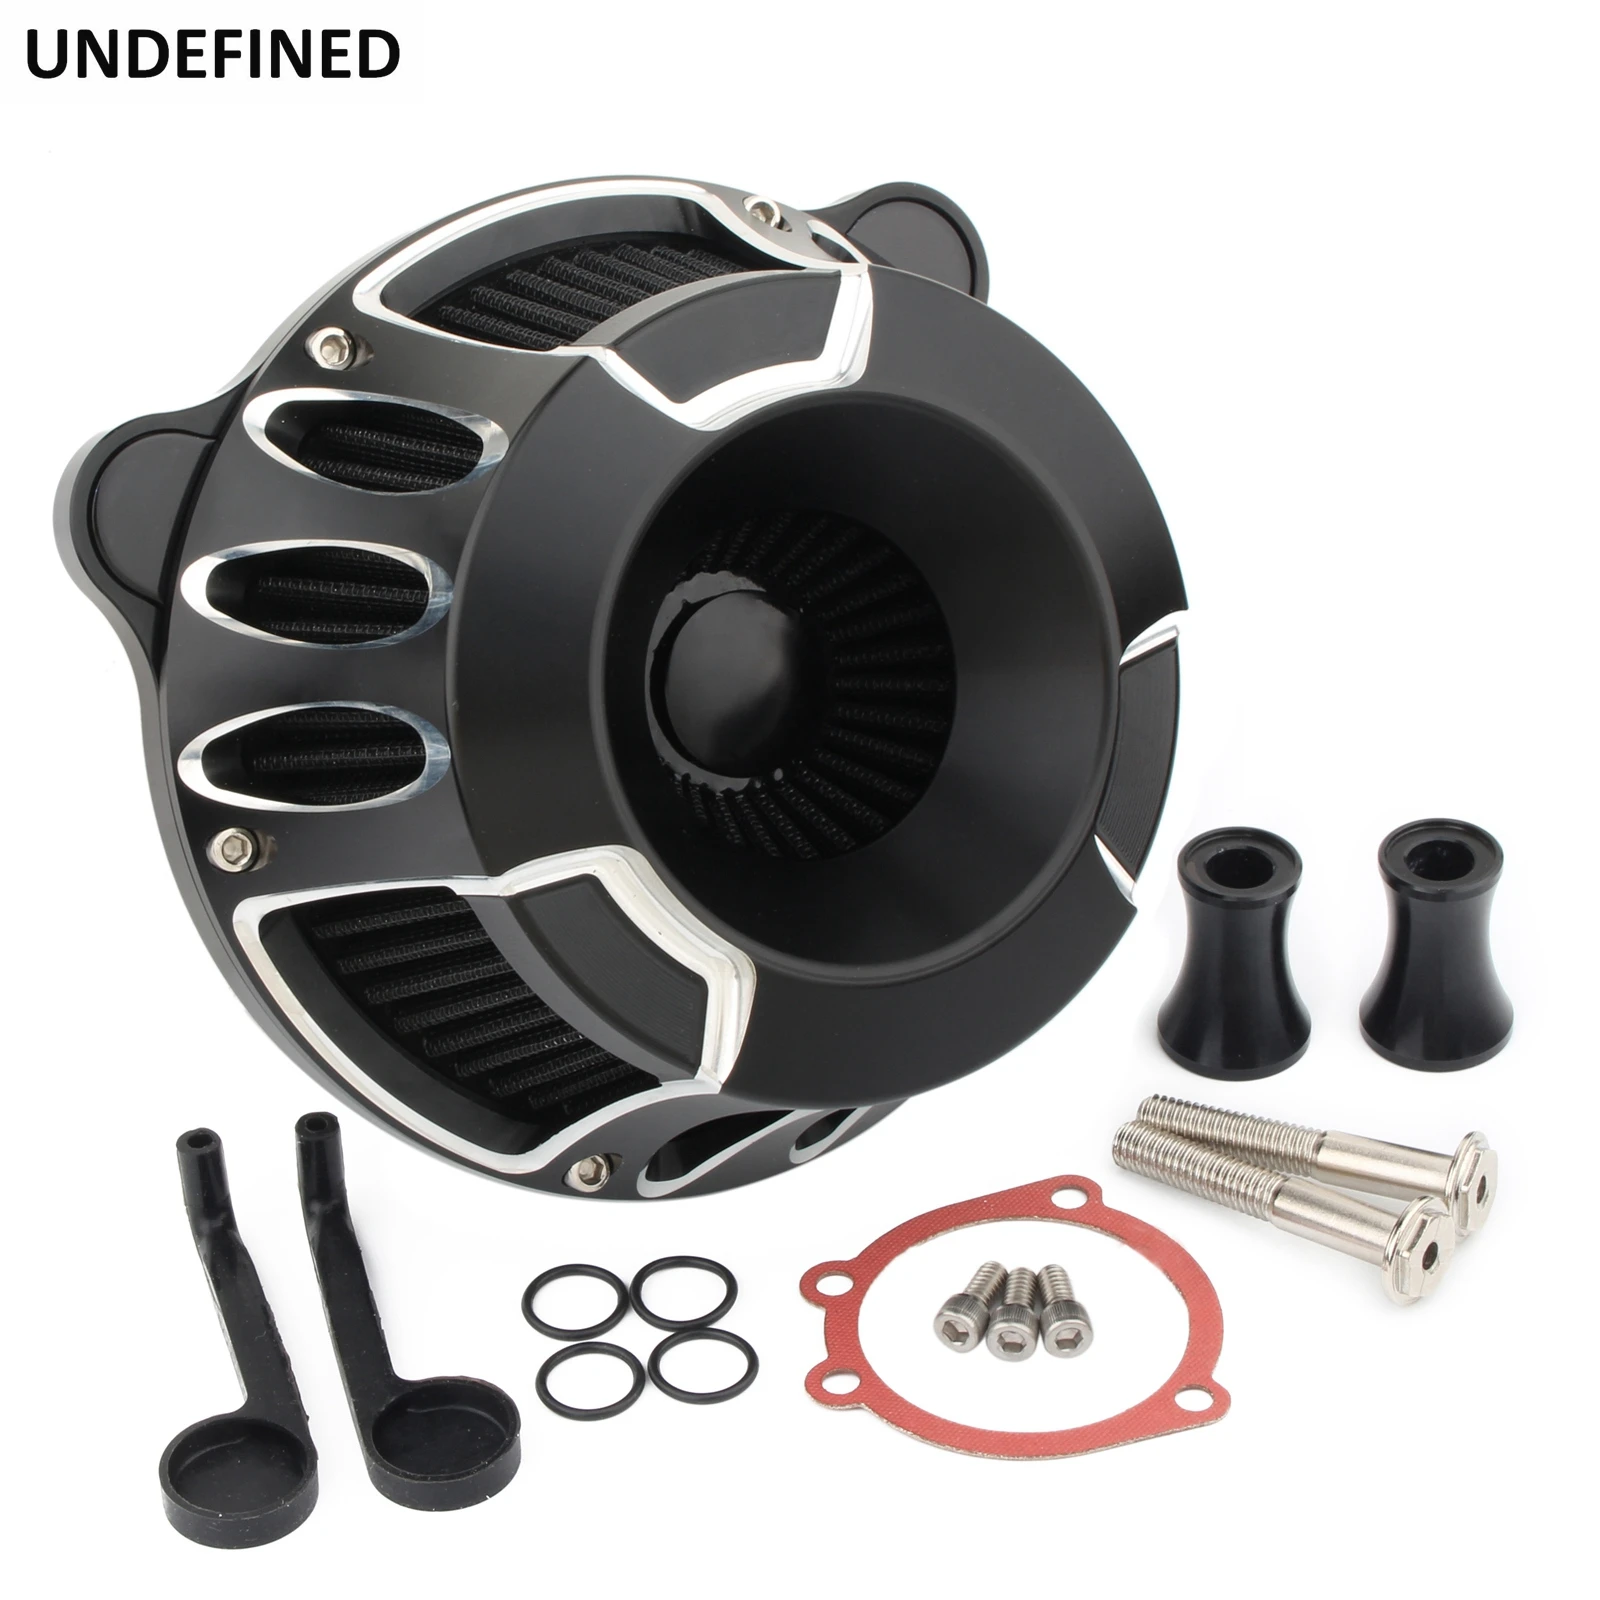 

Motorcycle Air Filter Air Intake System For Harley Dyna FXR Low Rider Touring Road King Electra Street Glide Softail Fat Boy